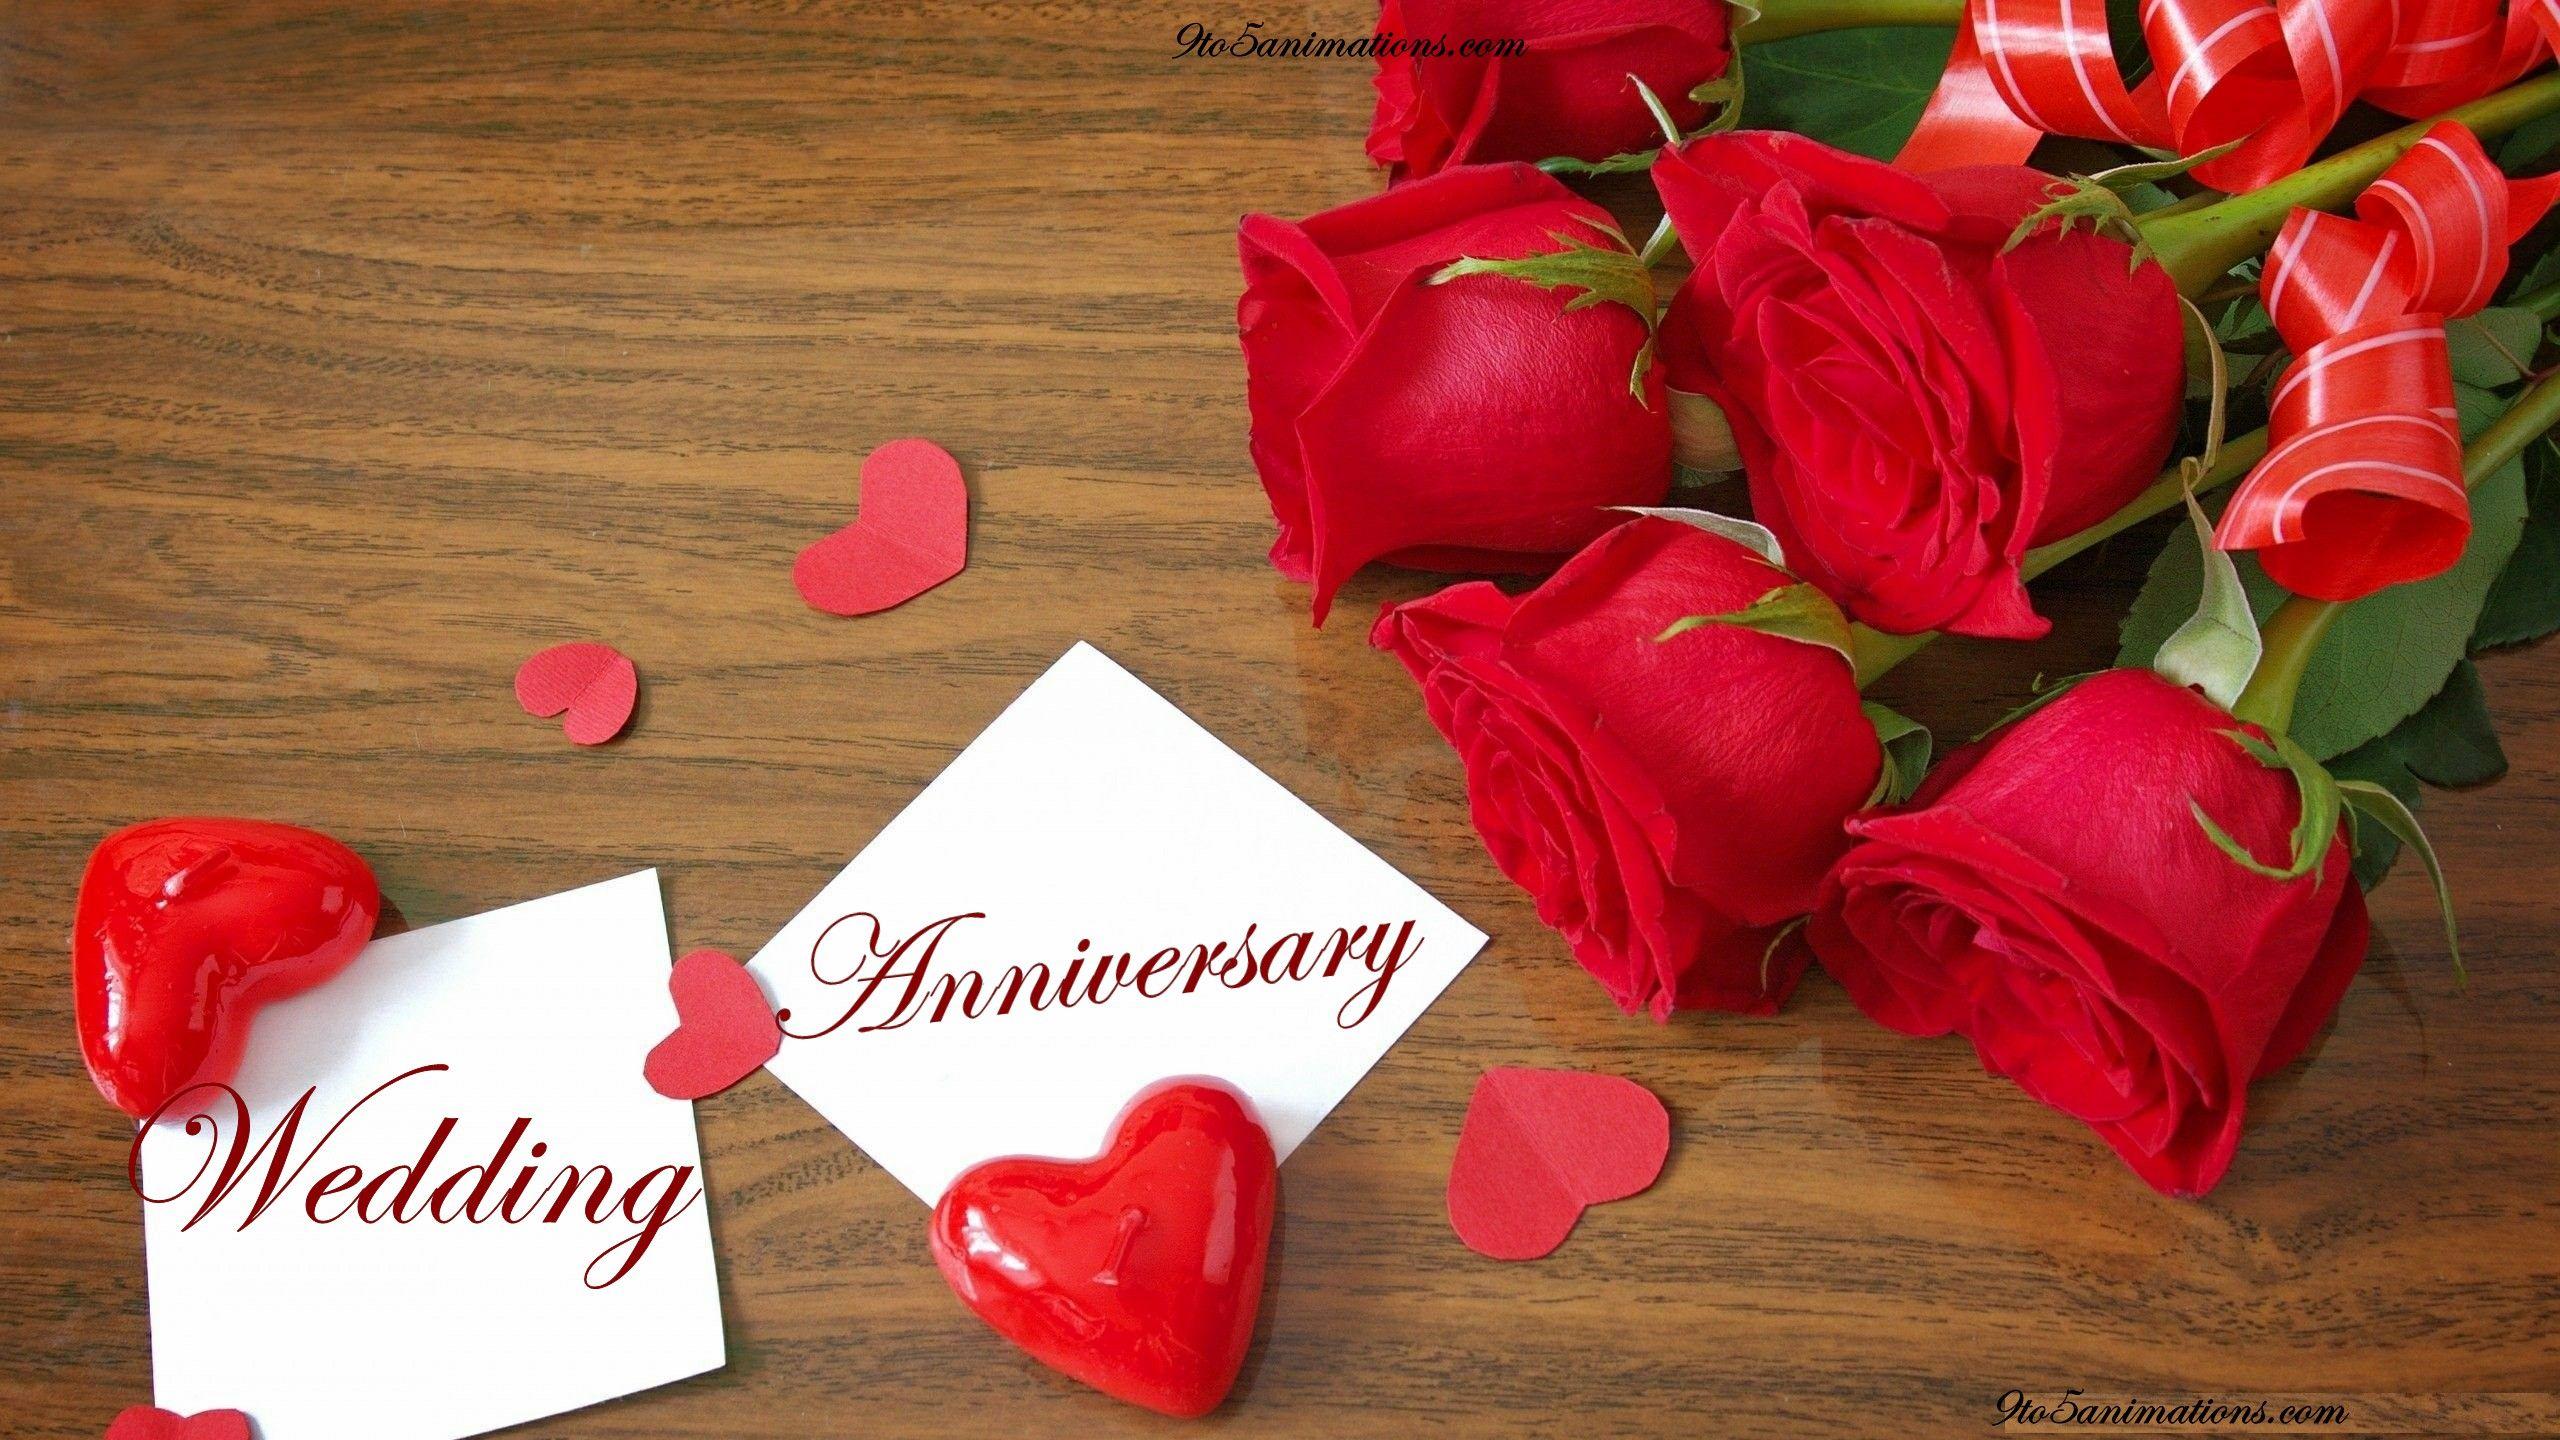 Wedding Anniversary Rose Wishes Image Free download